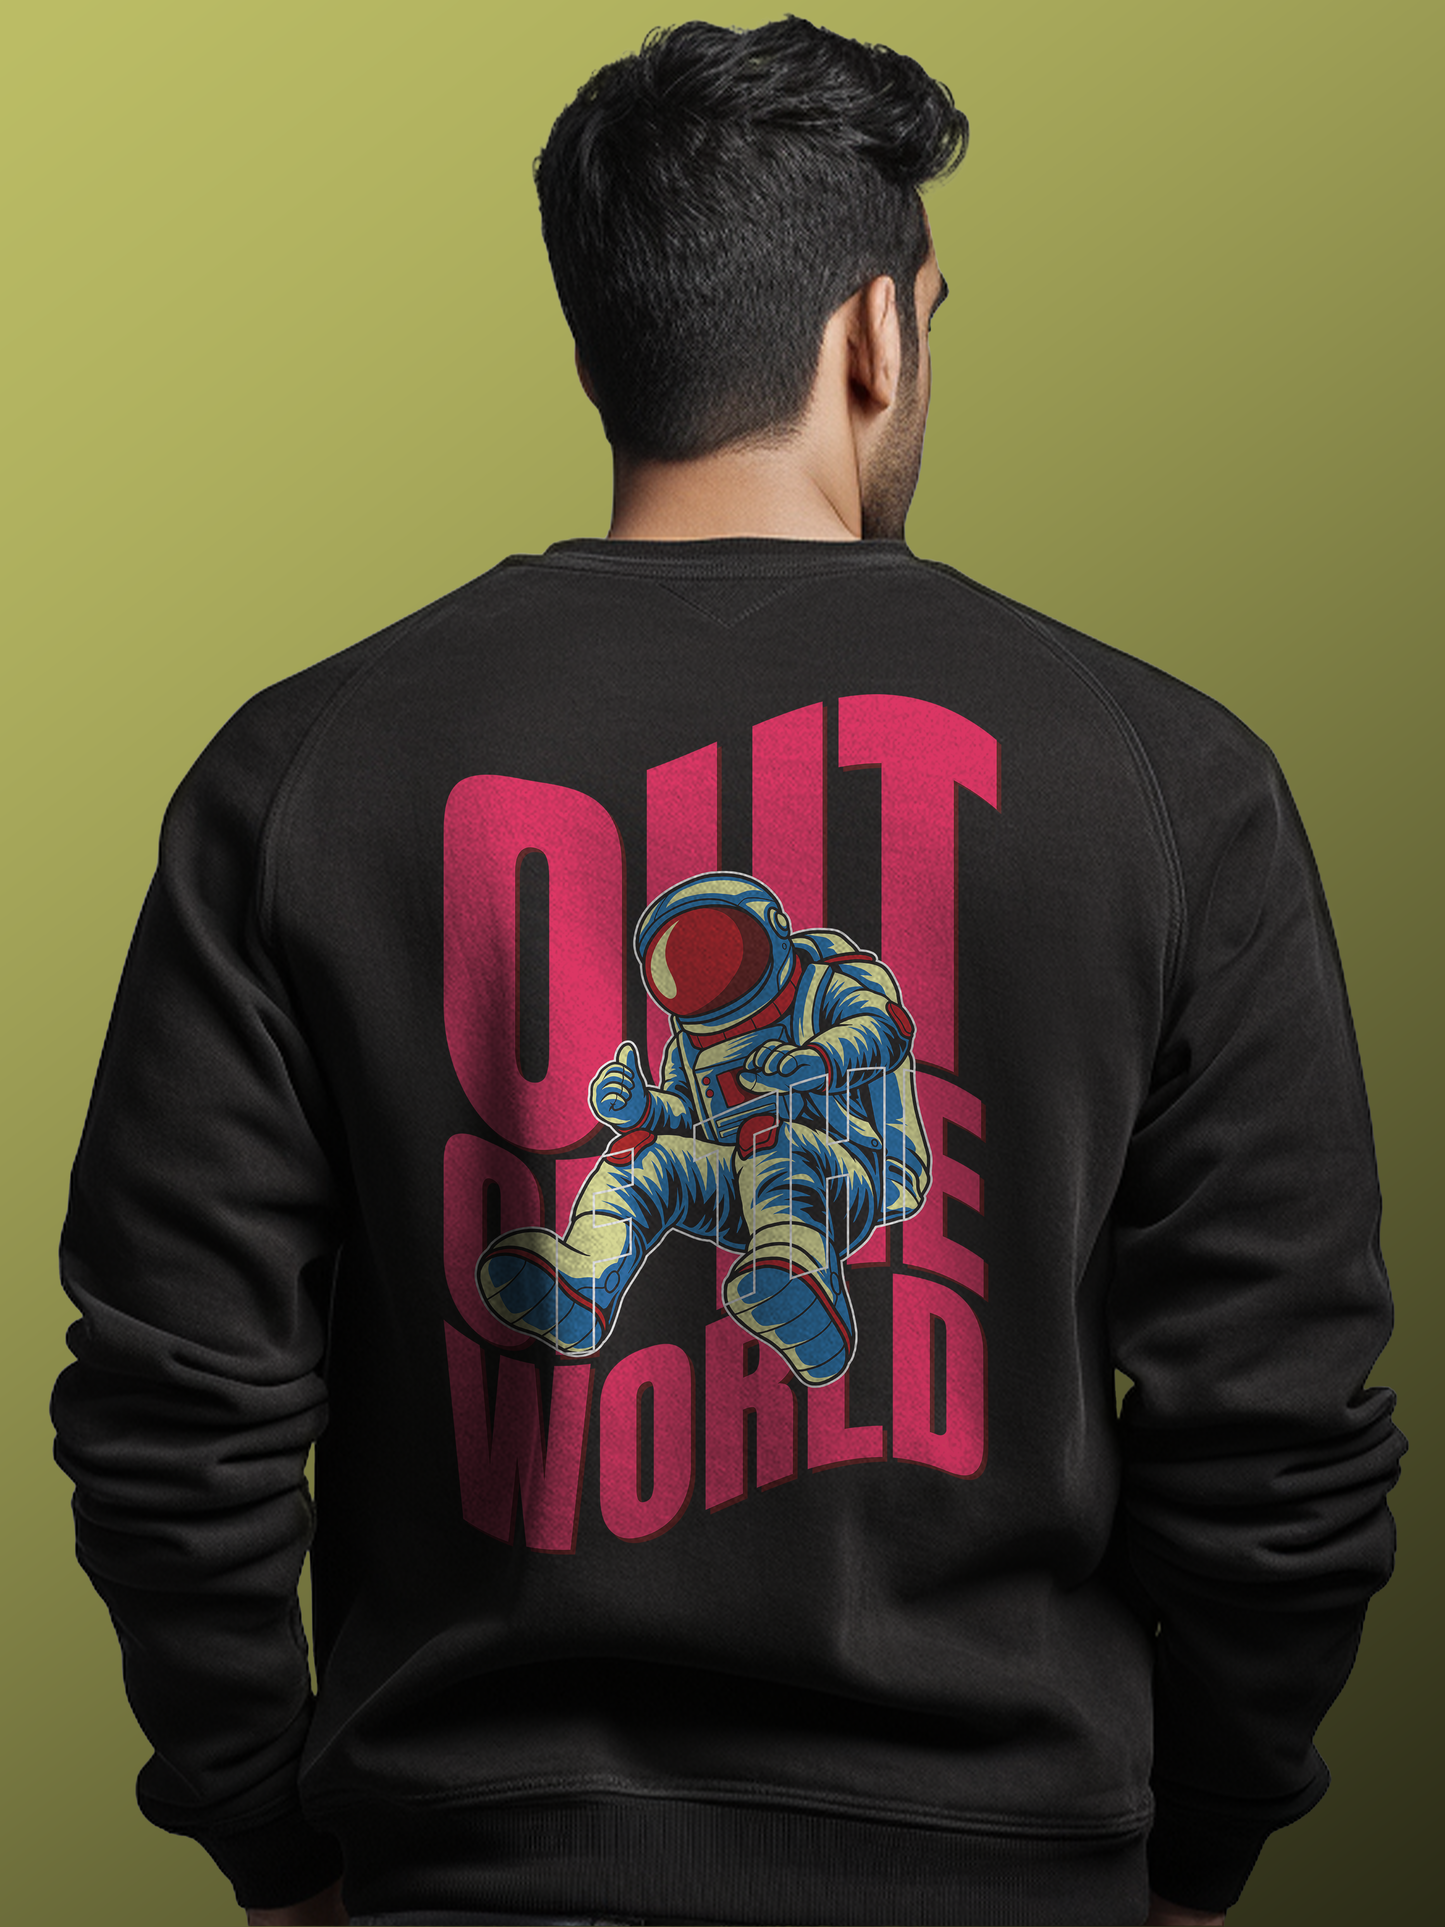 Out of the World